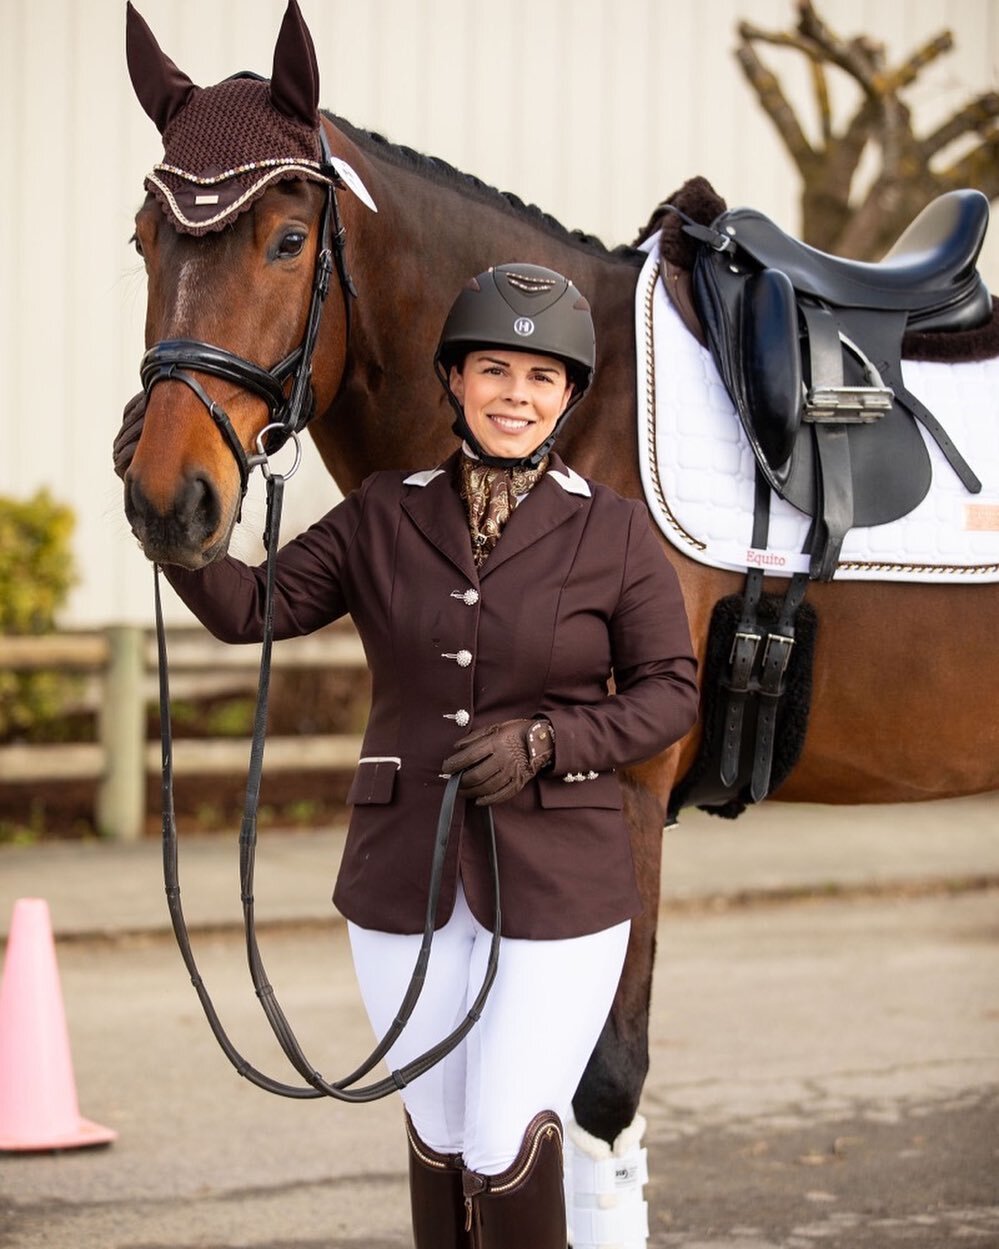 Jessica Alvarado&rsquo;s Teacher&rsquo;s Pet dressed up at his first recognized show. I love this brown outfit. 🤎 I am wearing a One k helmet, Annie&rsquo;s apparel jacket, esprit tights, and deniro boots. Moose is wearing a custom saddlery saddle, 